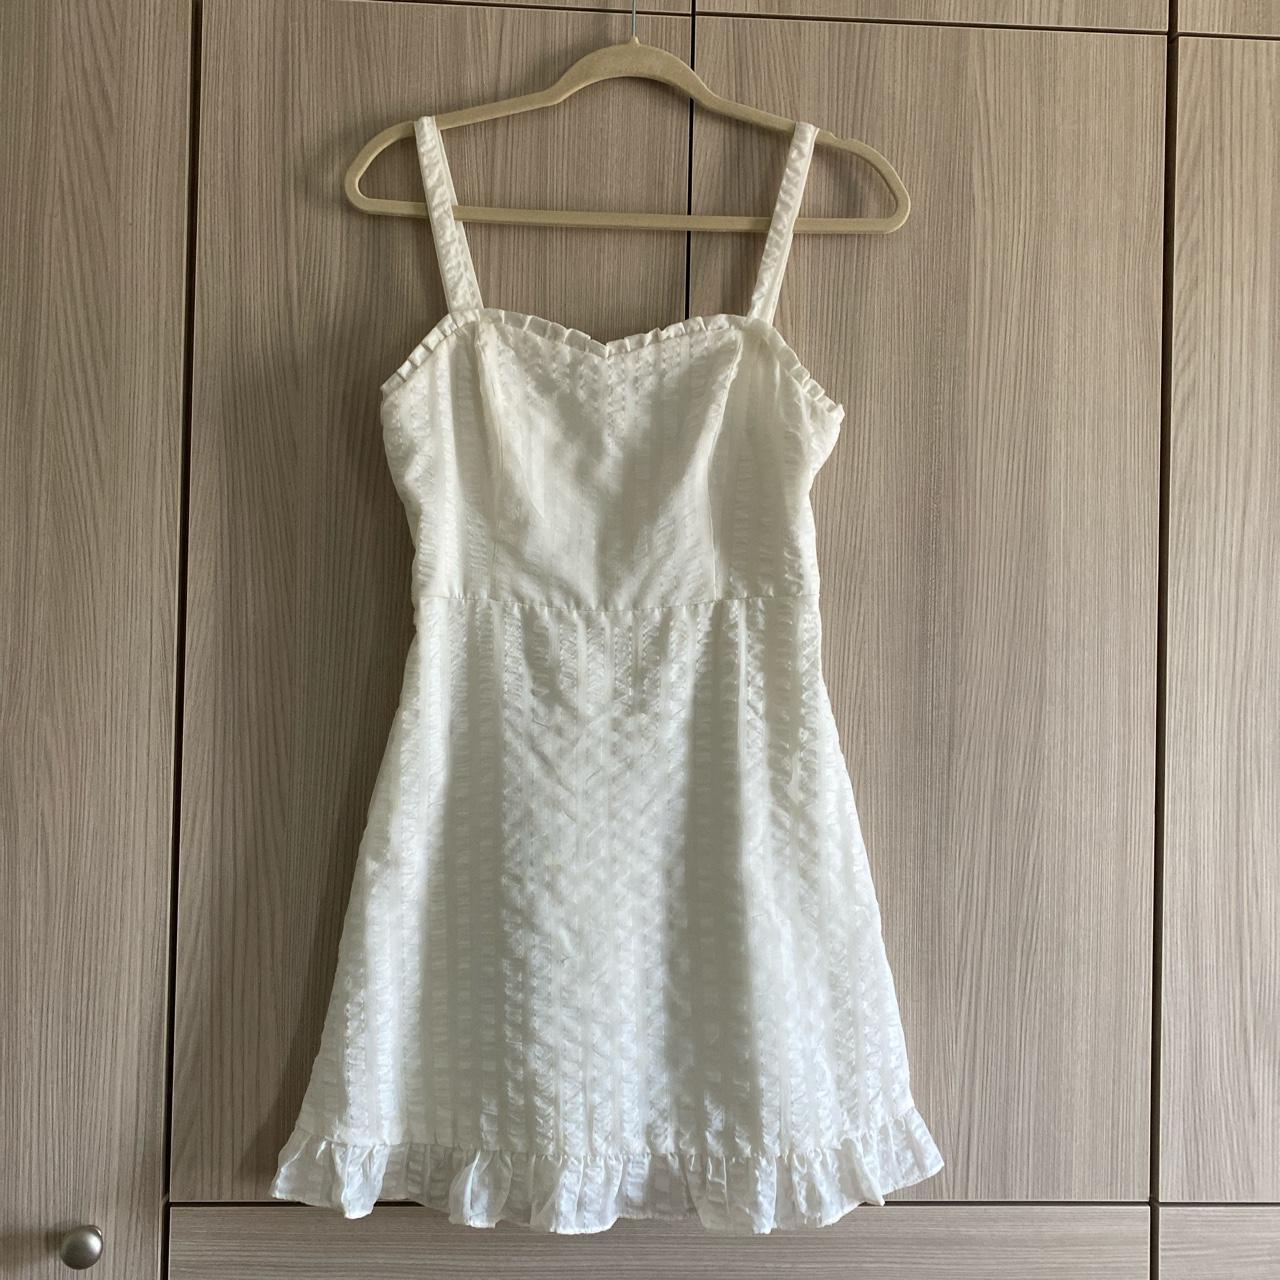 White Frilly Dress Bought from Nordstroms Size... - Depop